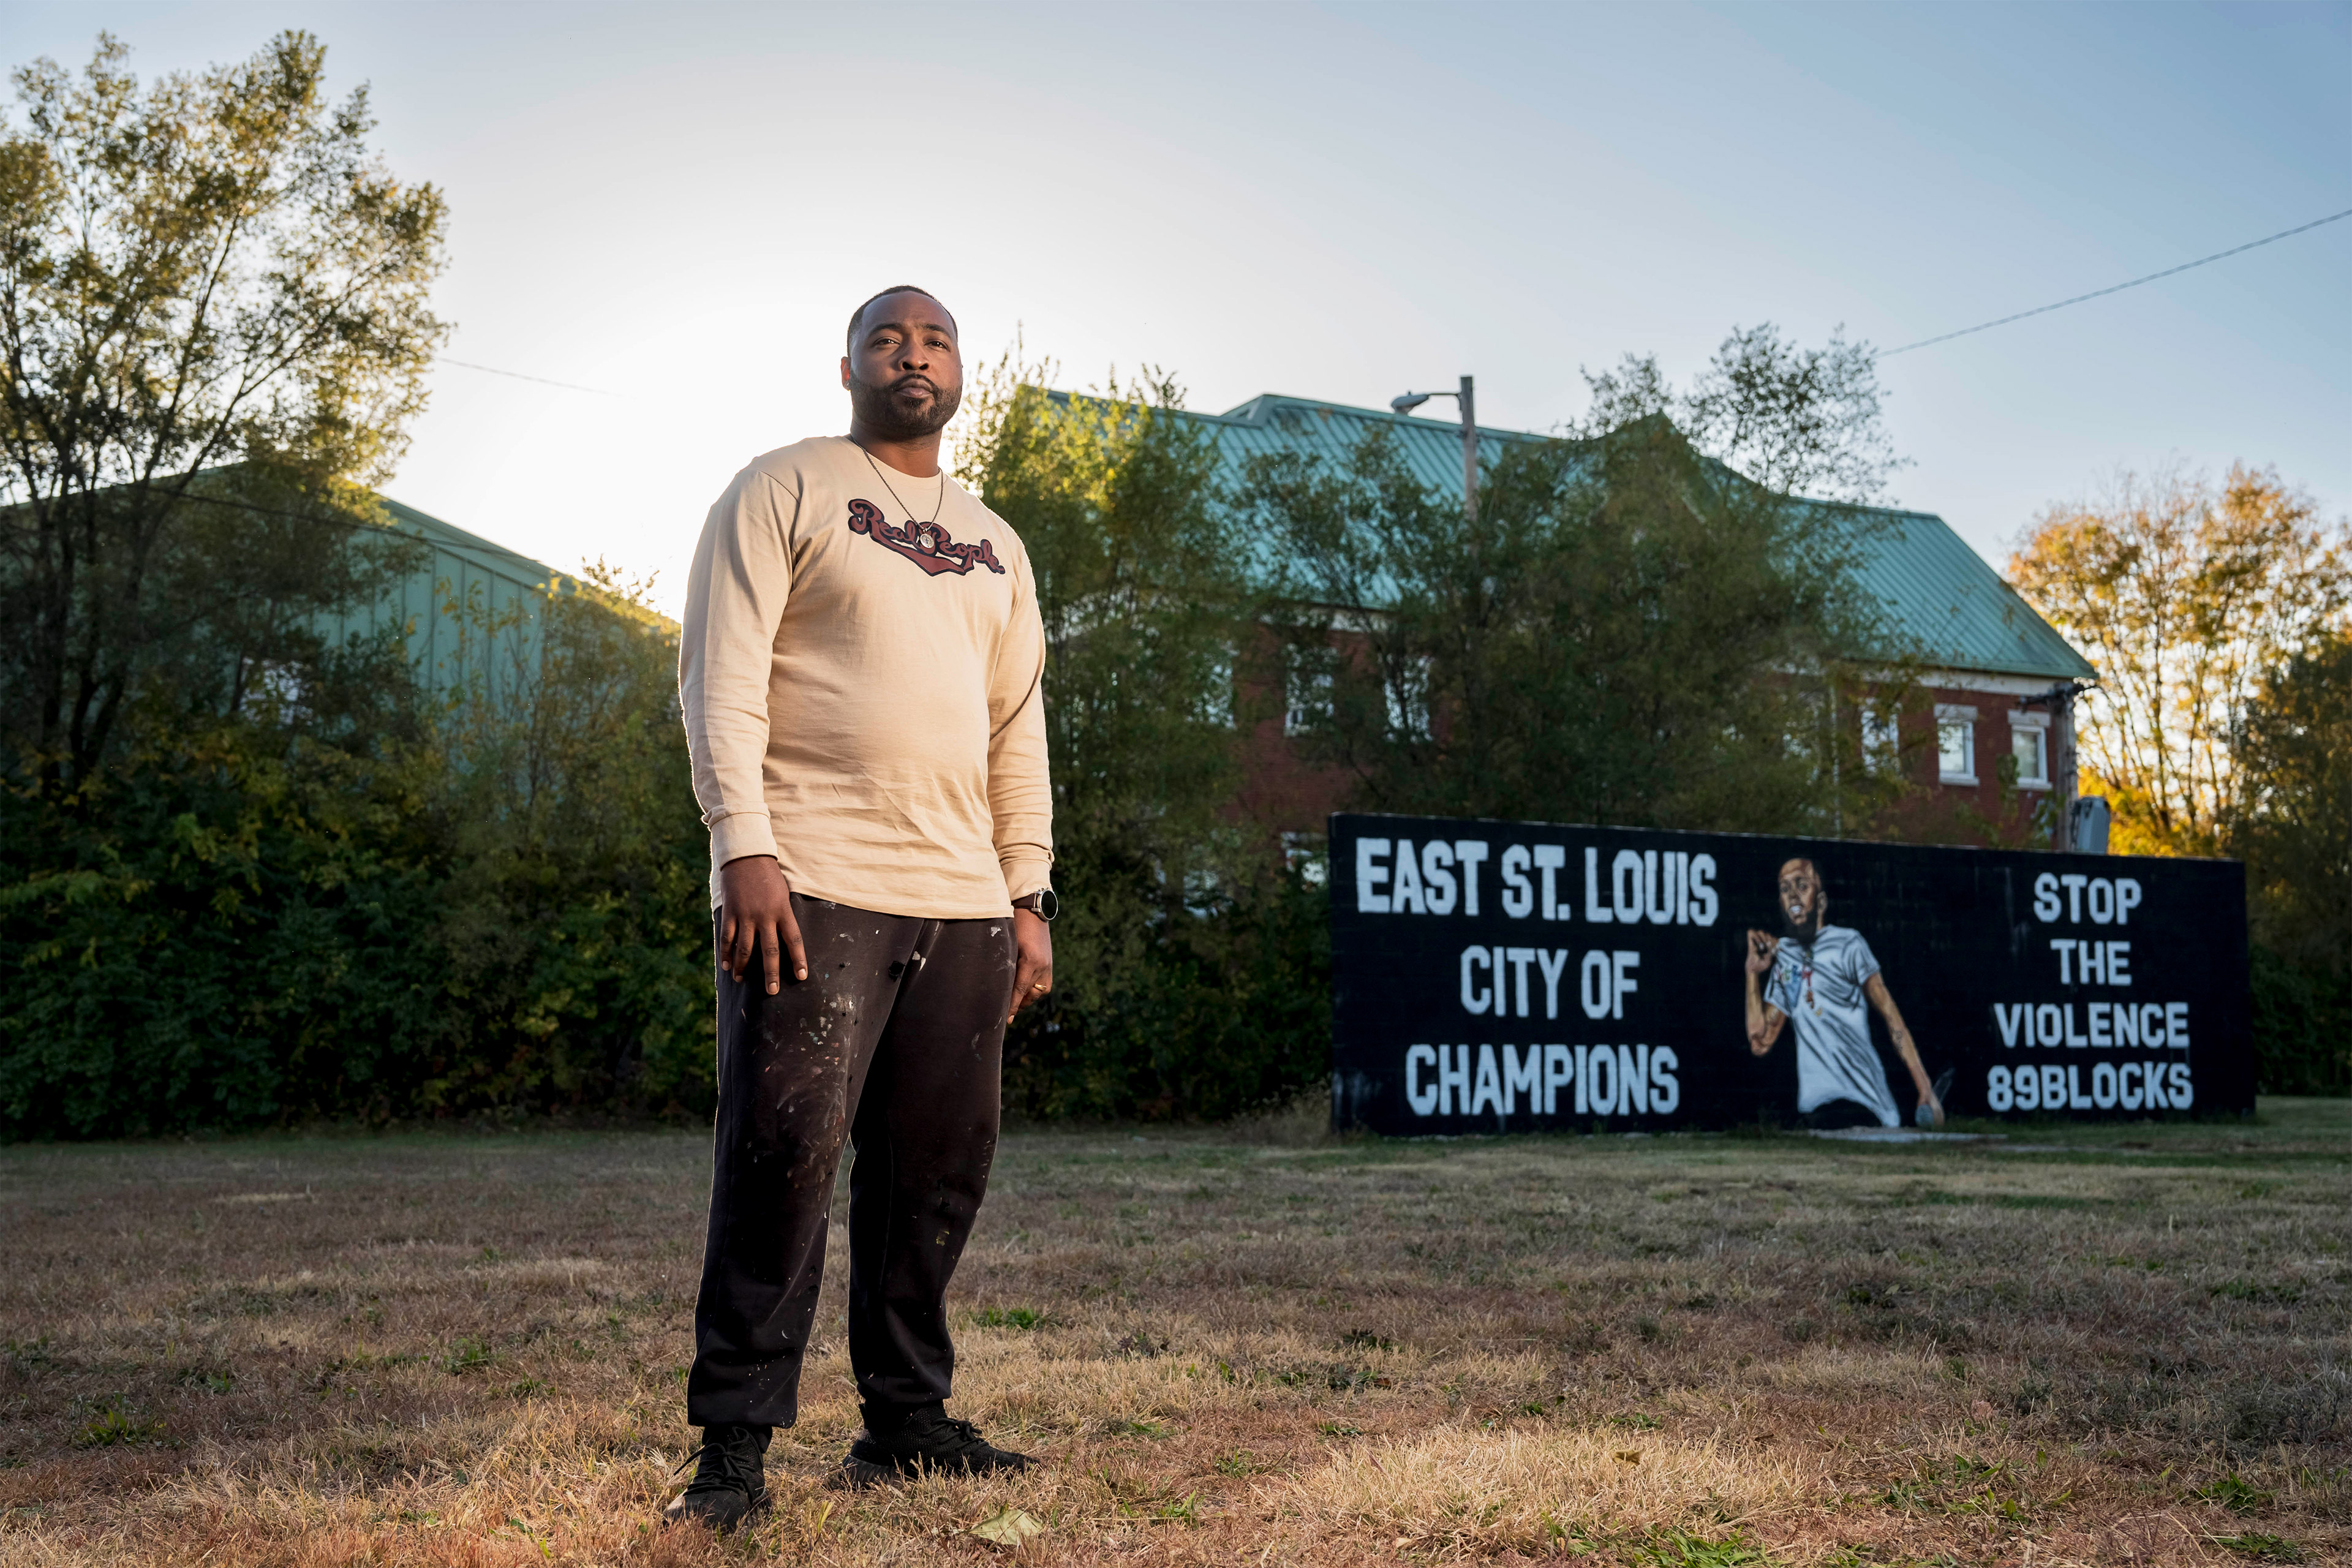 A photo shows Mykael Ash standing outside by a mural he painted of rapper Cedric Gooden. Text on the mural reads, "East St. Louis City of Champions" and "Stop the violence. 89blocks."